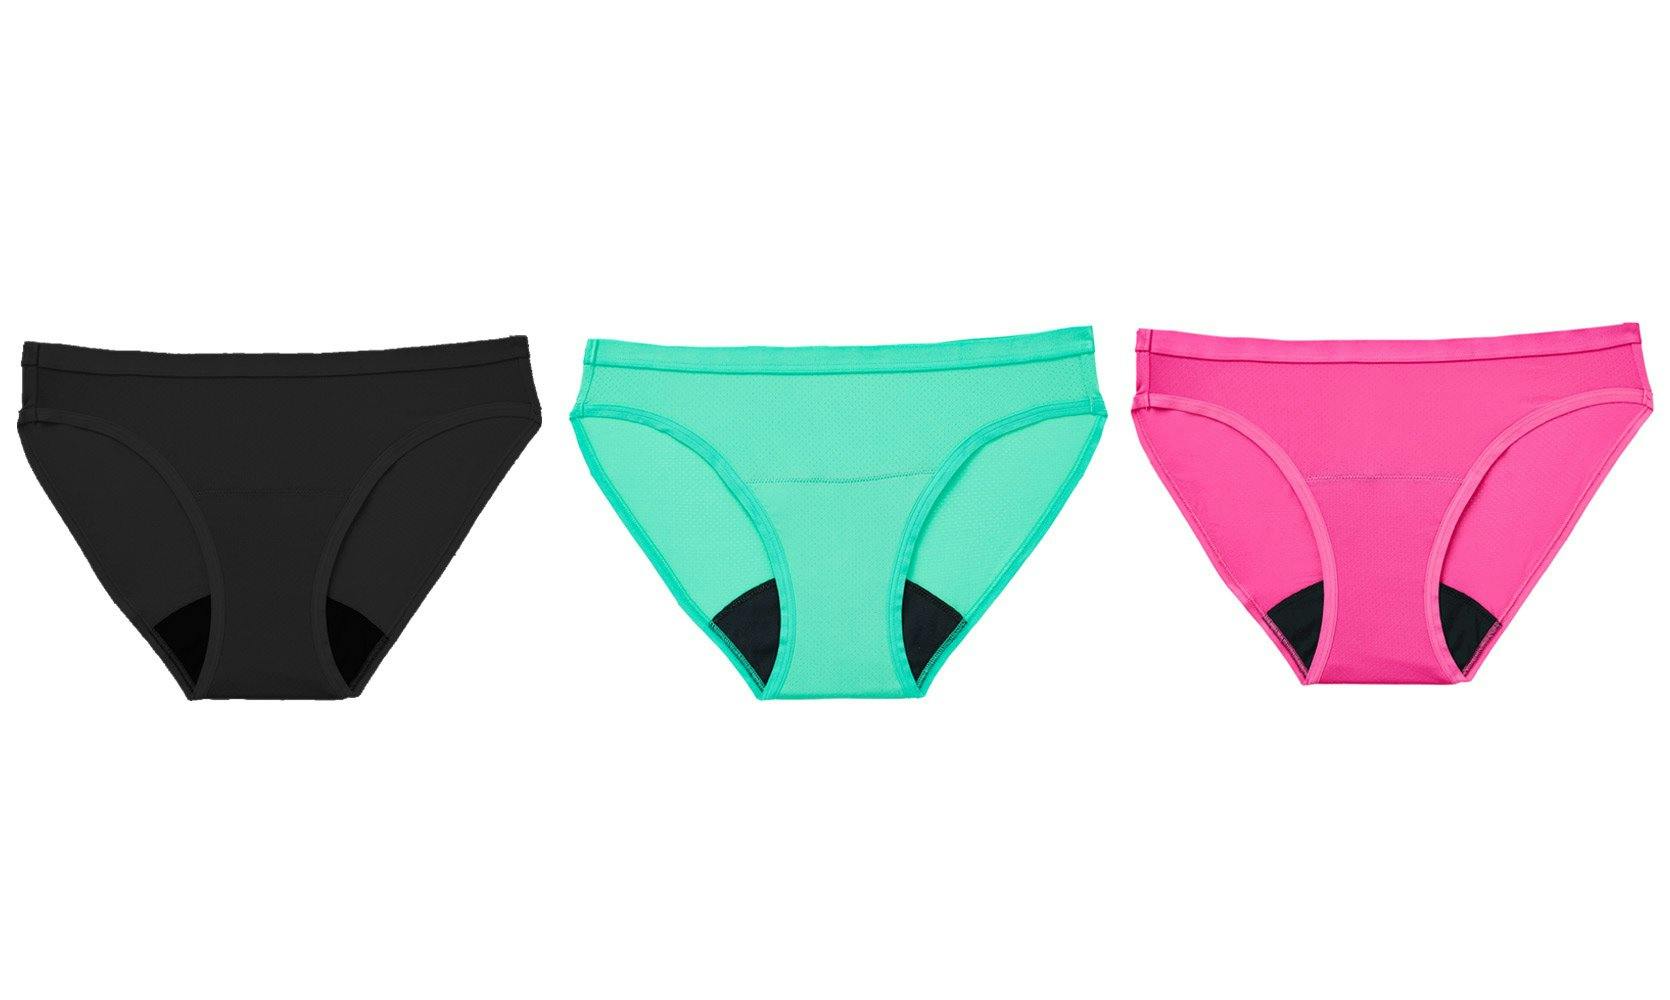 Thinx - The Daily Set in Bikini - CollectionBack